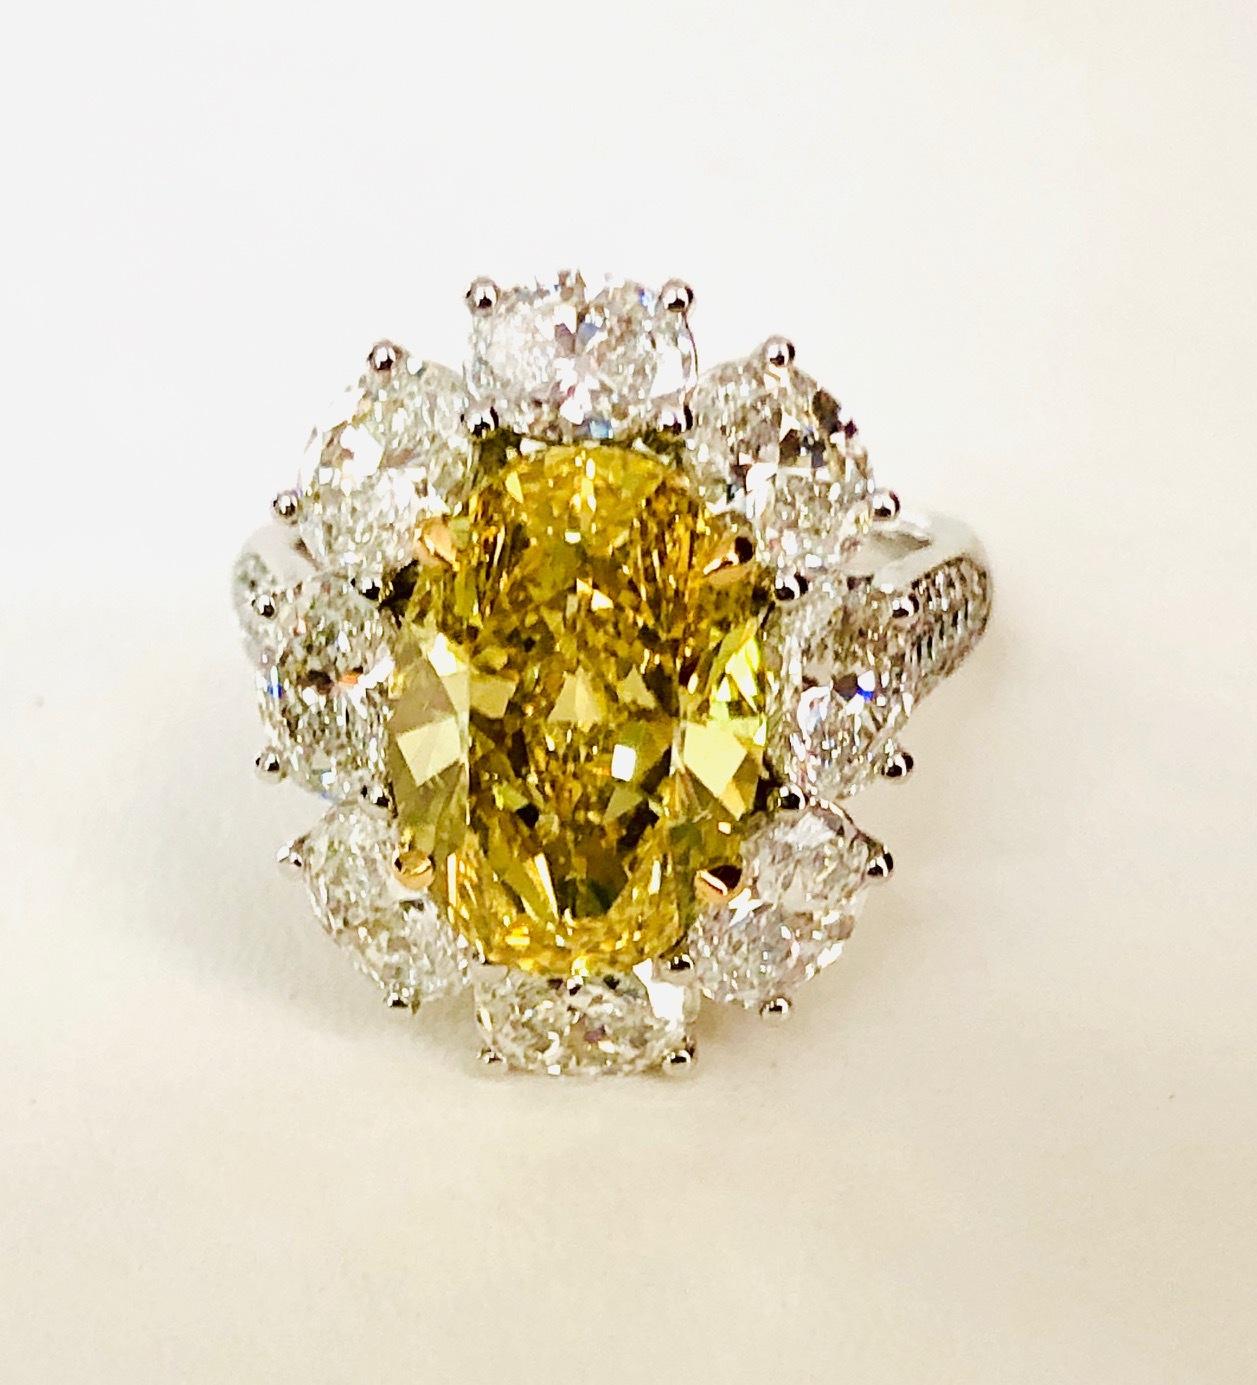 Contemporary Fancy Vivid Yellow/GIA Report Diamond 4.43 CT,  Platinum/YG  Ring For Sale